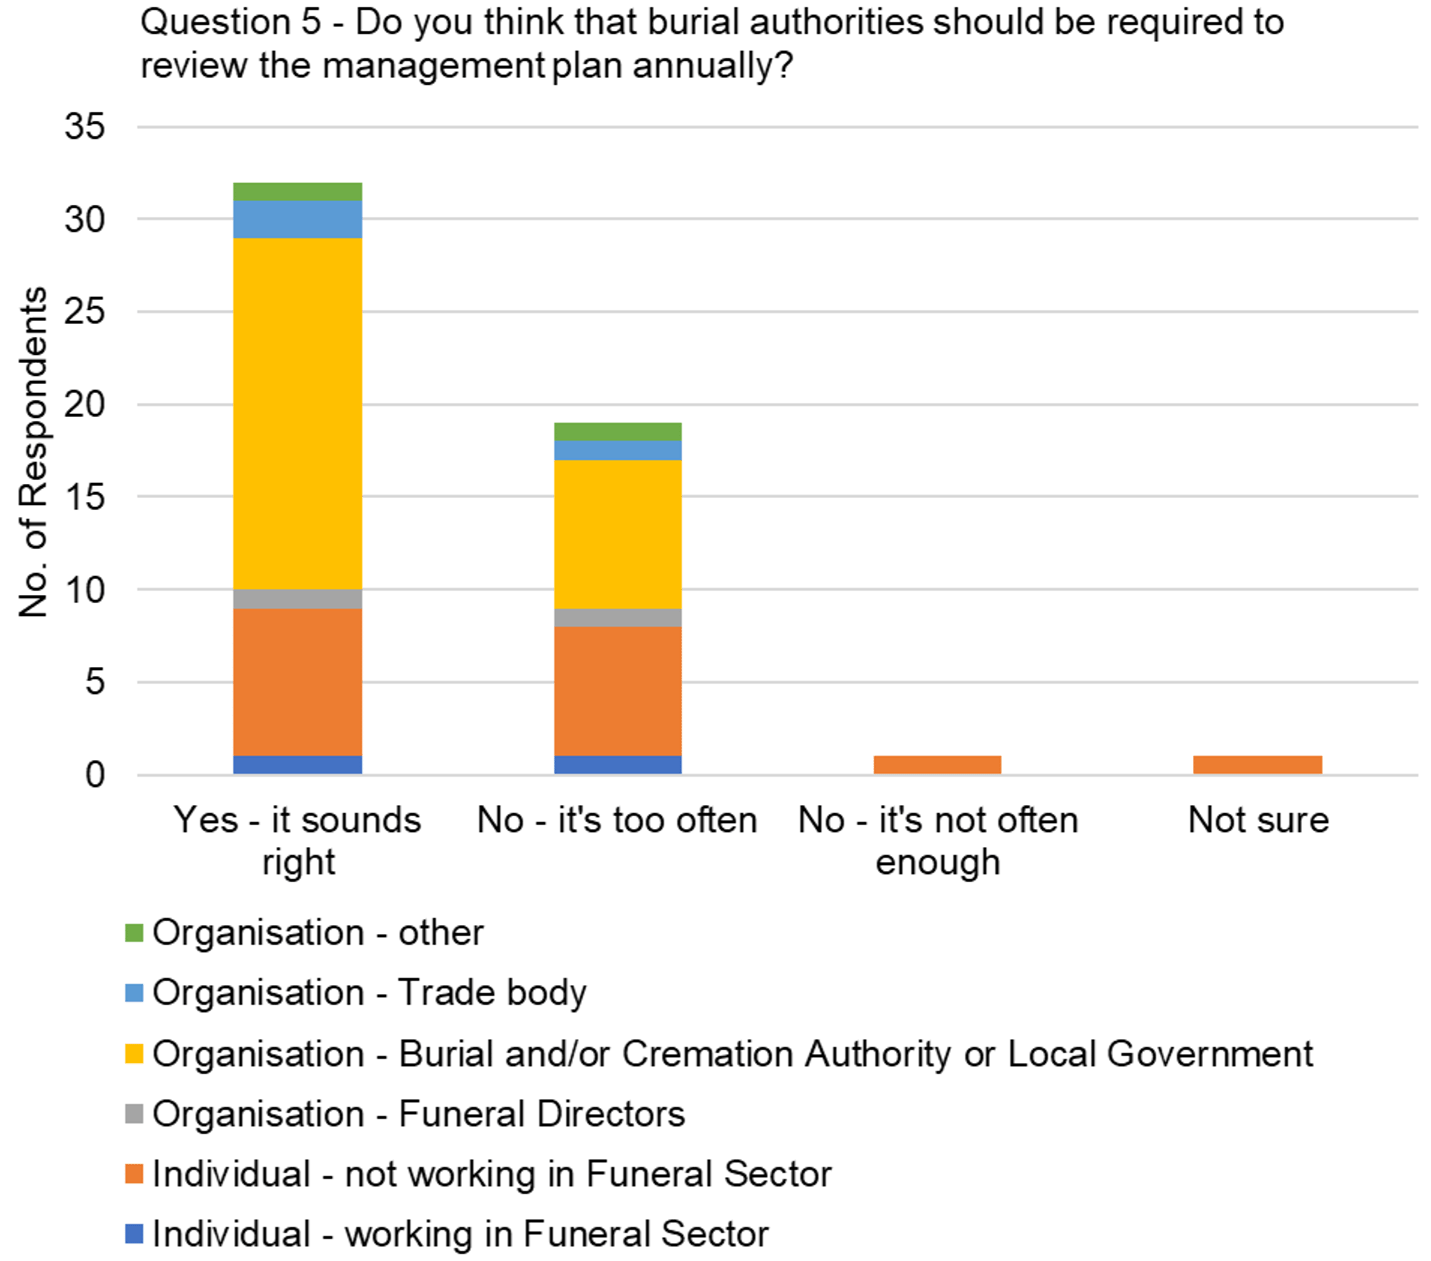 The graph visually presents the data from table 5, focussing on the responses to the question, "Do you think that burial authorities should be required to review the management plan annually?"